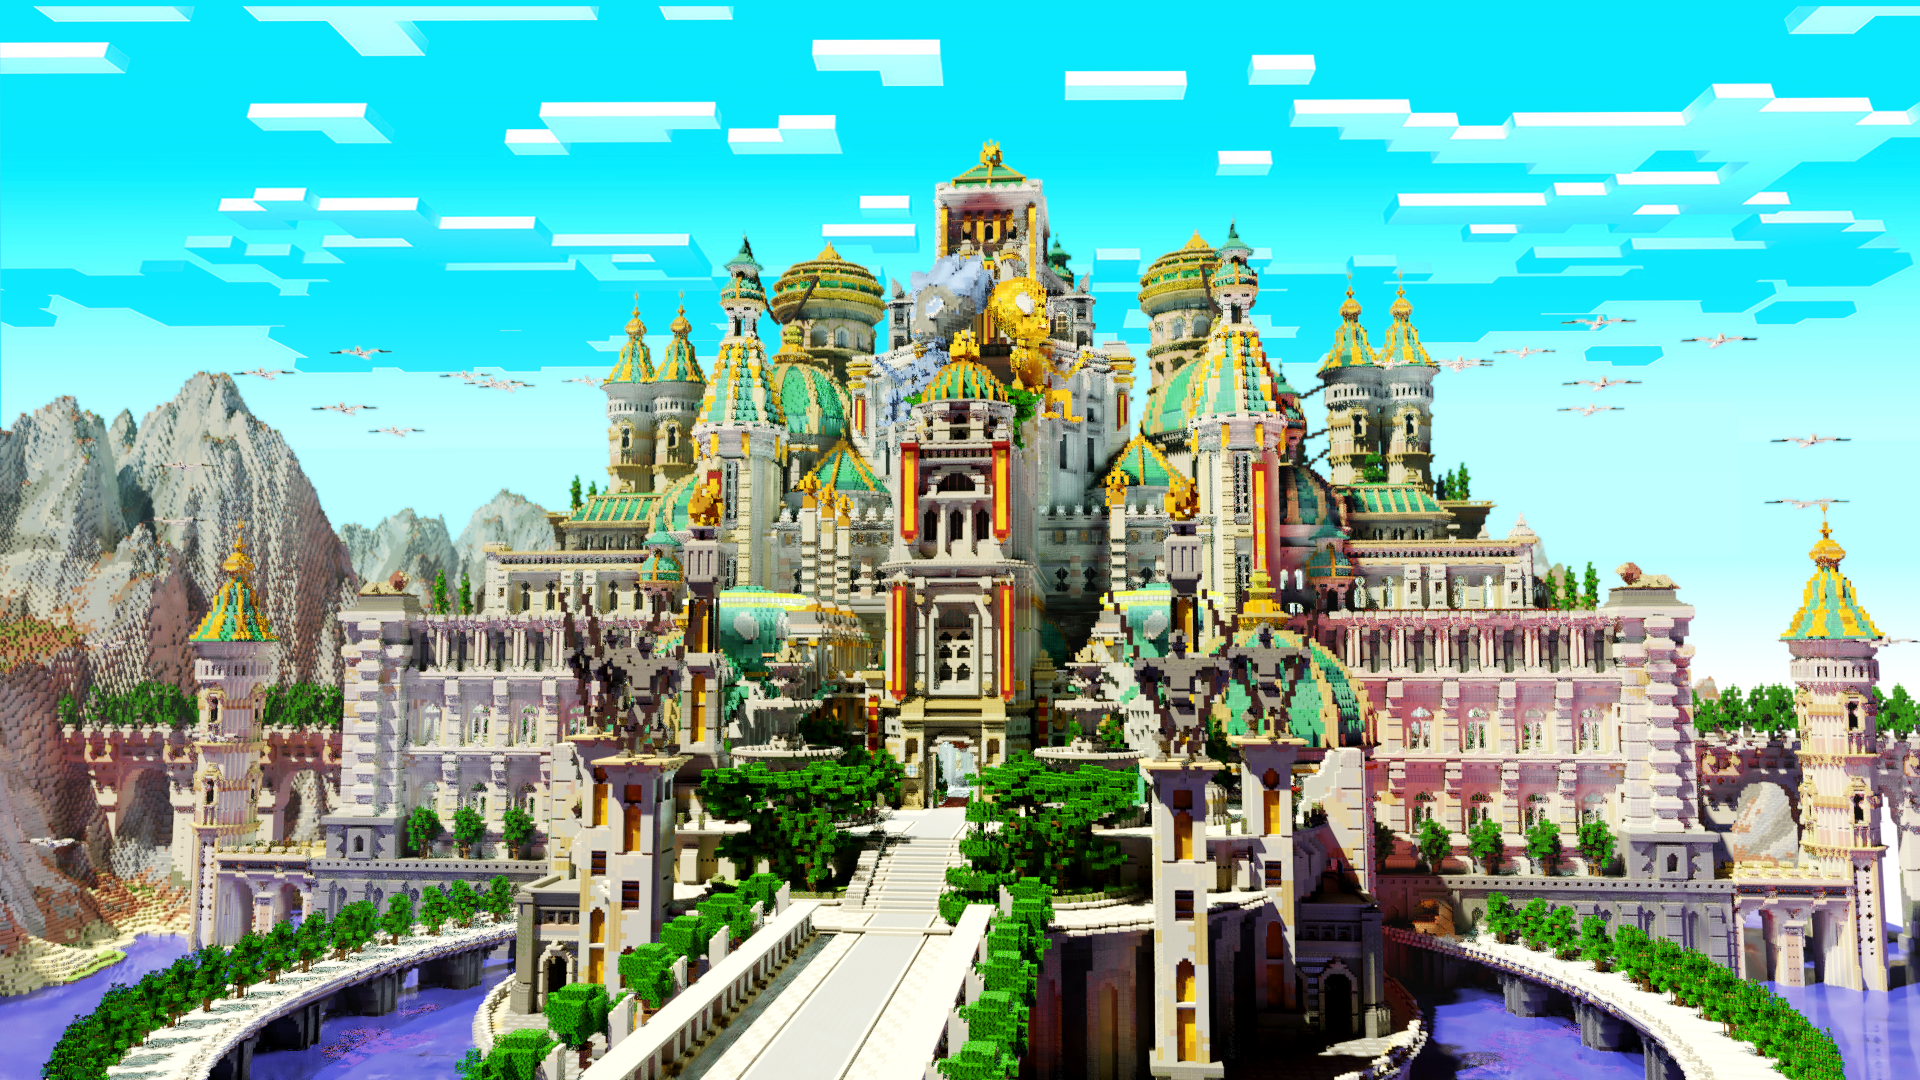 Build minecraft of a medieval city